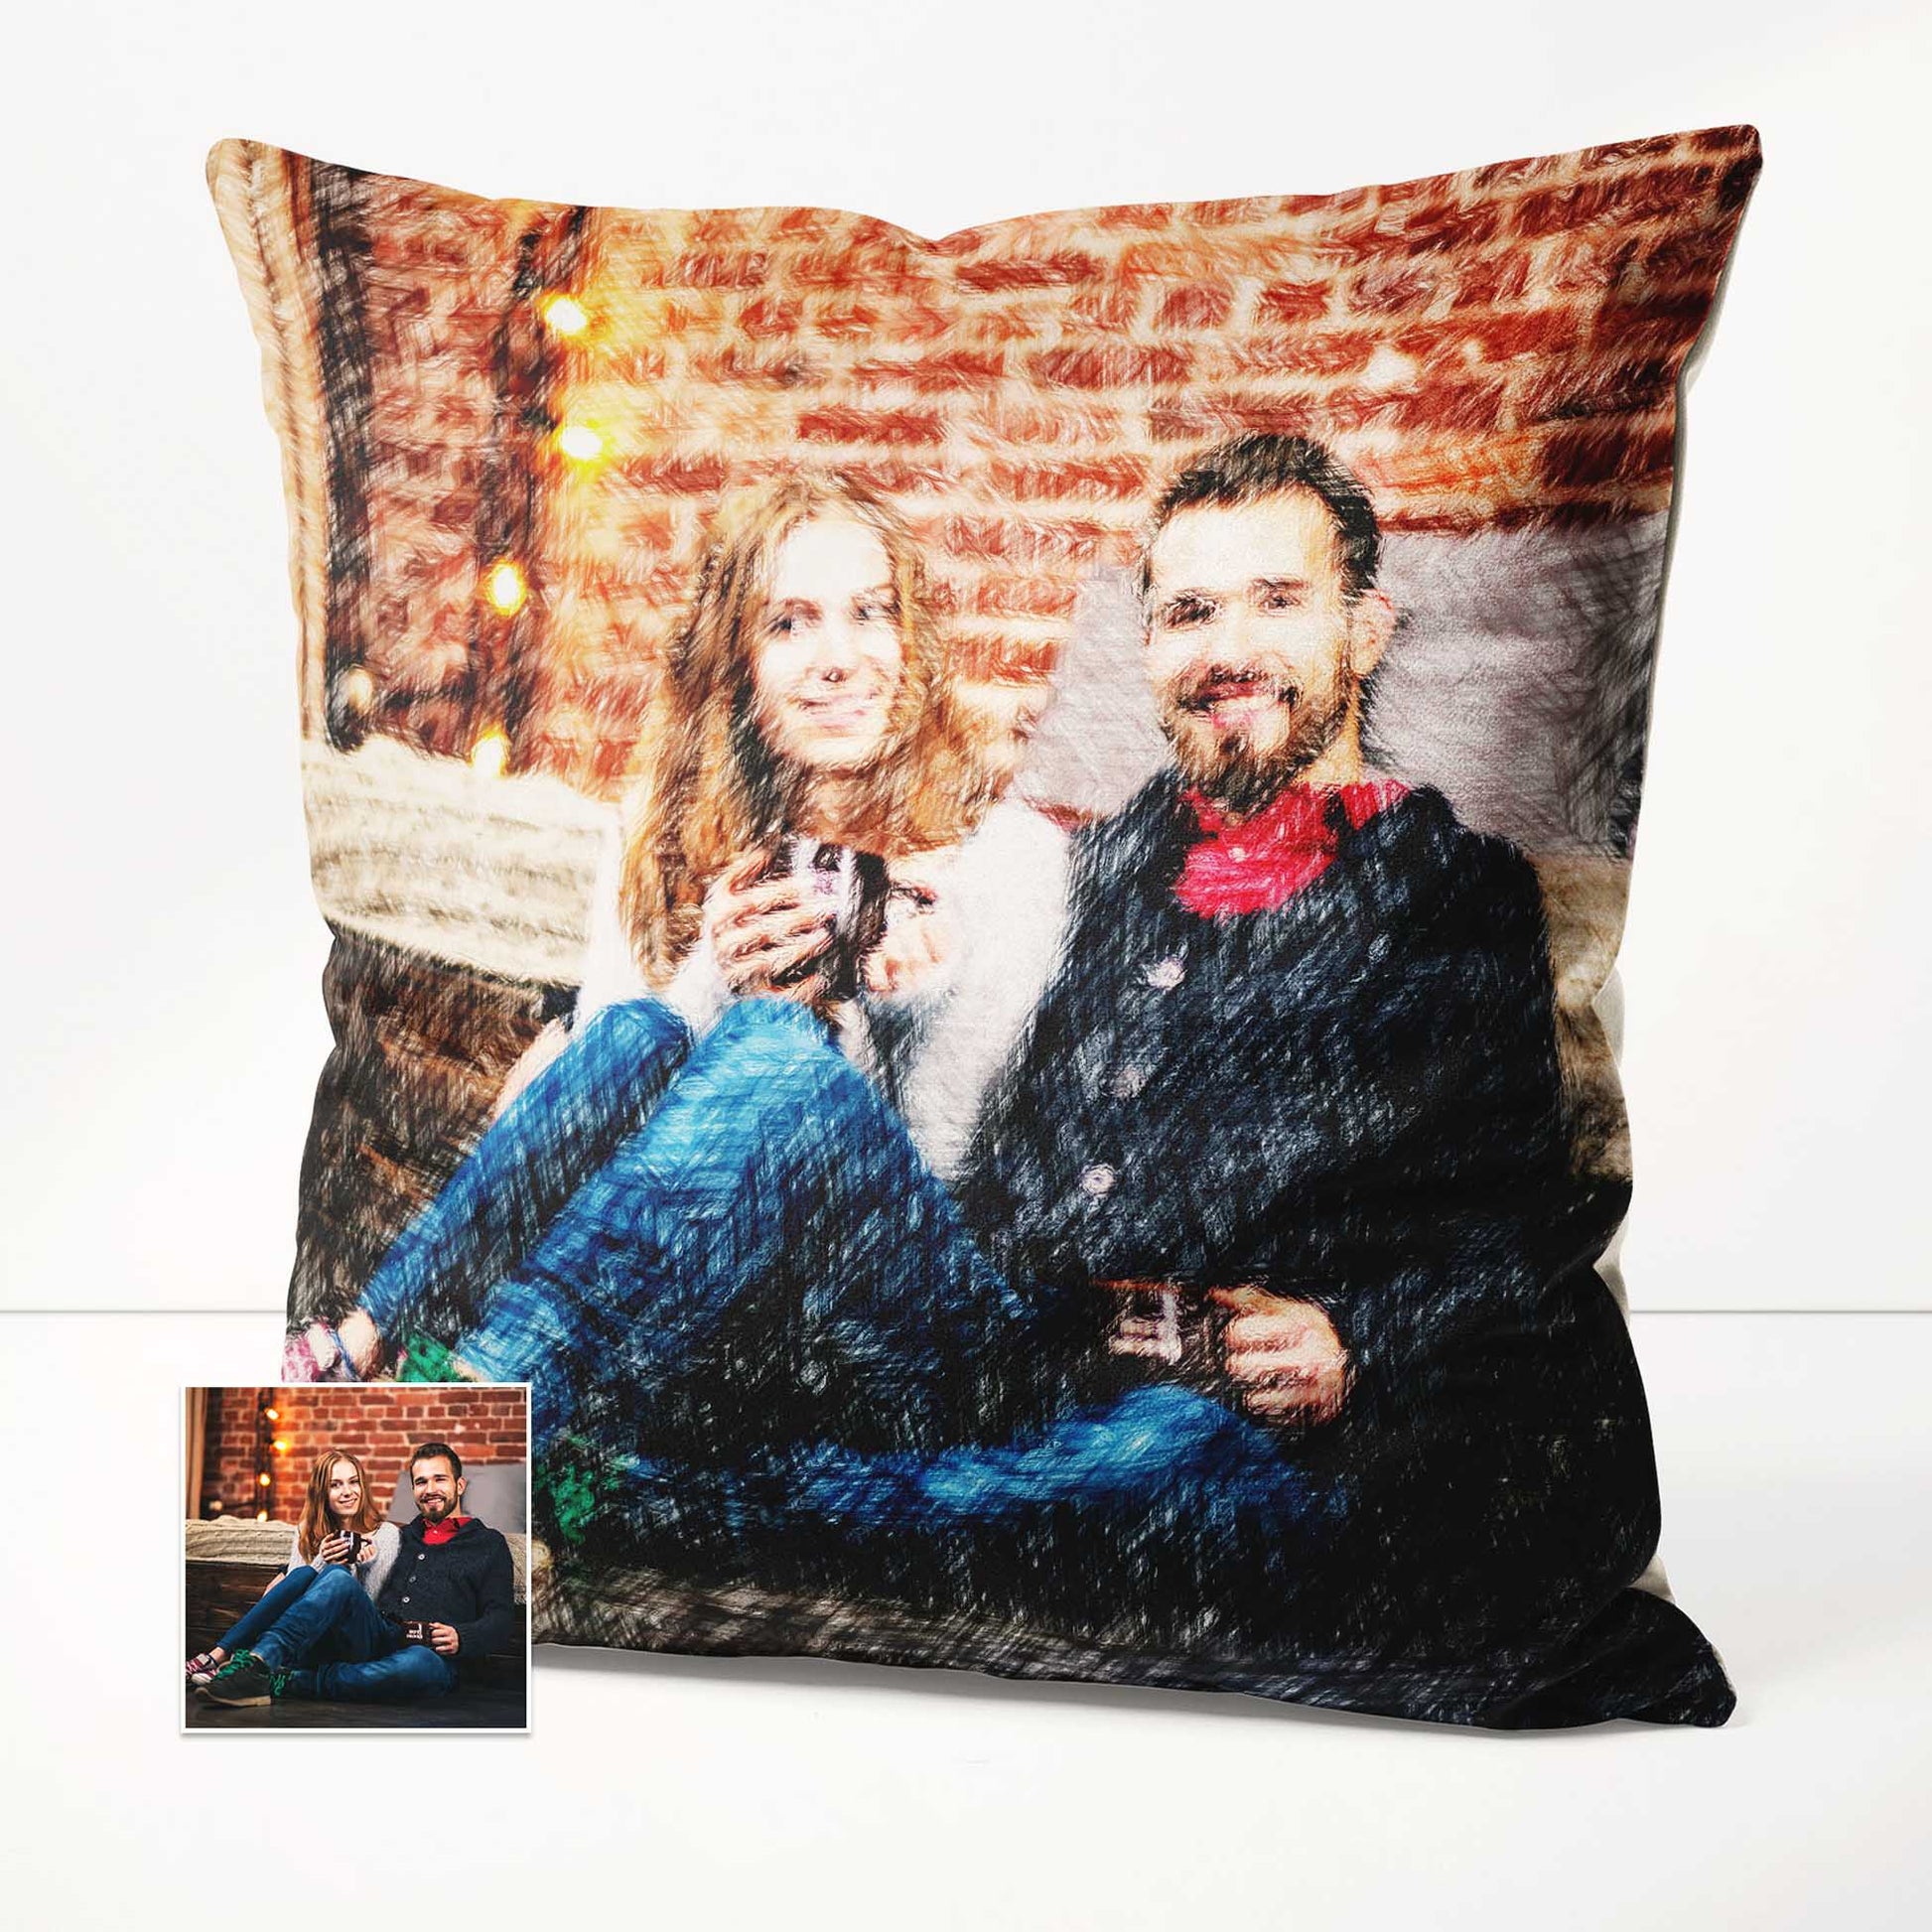 Embrace the joy of personalization with our Personalised Colourful Drawing Cushion. Capture precious memories by turning your photo into a colorful drawing that adorns this soft velvet cushion. It's designed to bring comfort and fun 